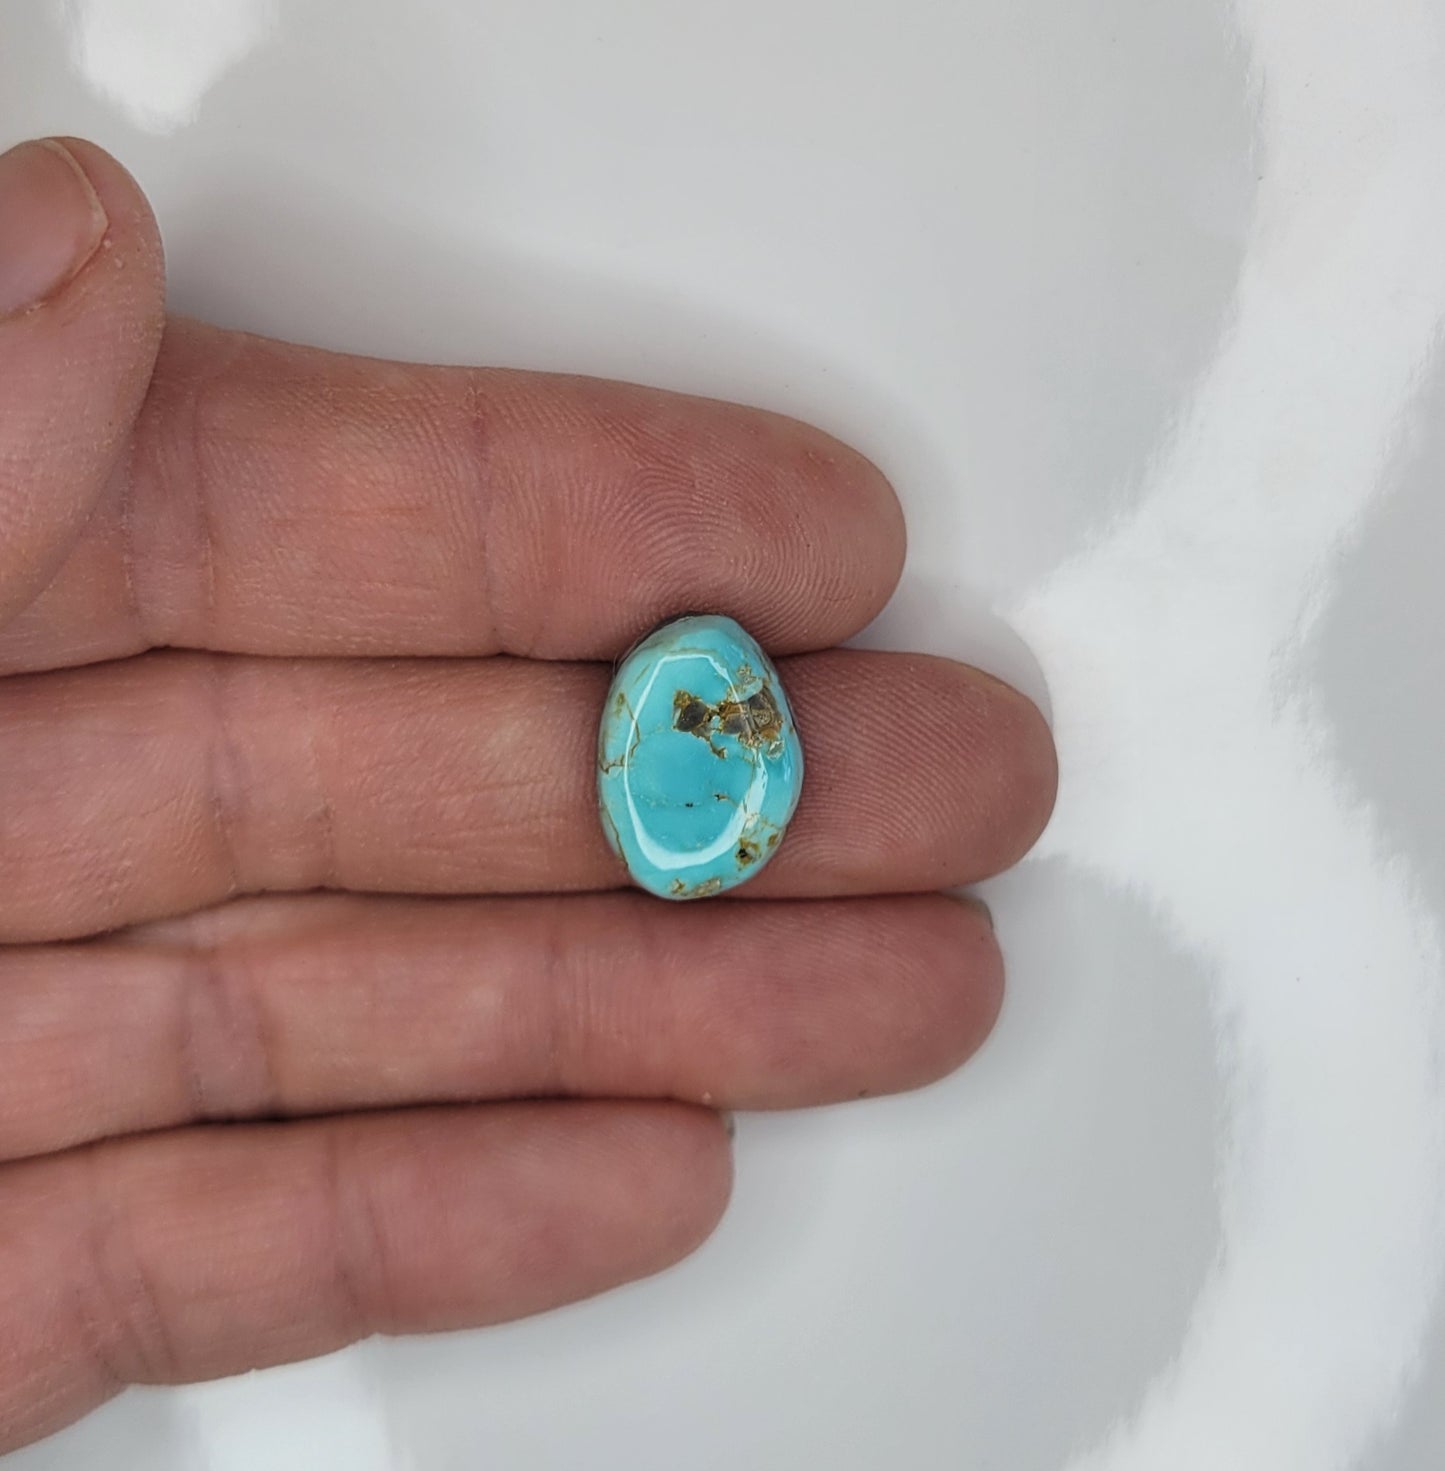 Shield Maiden Turquoise Cabochon